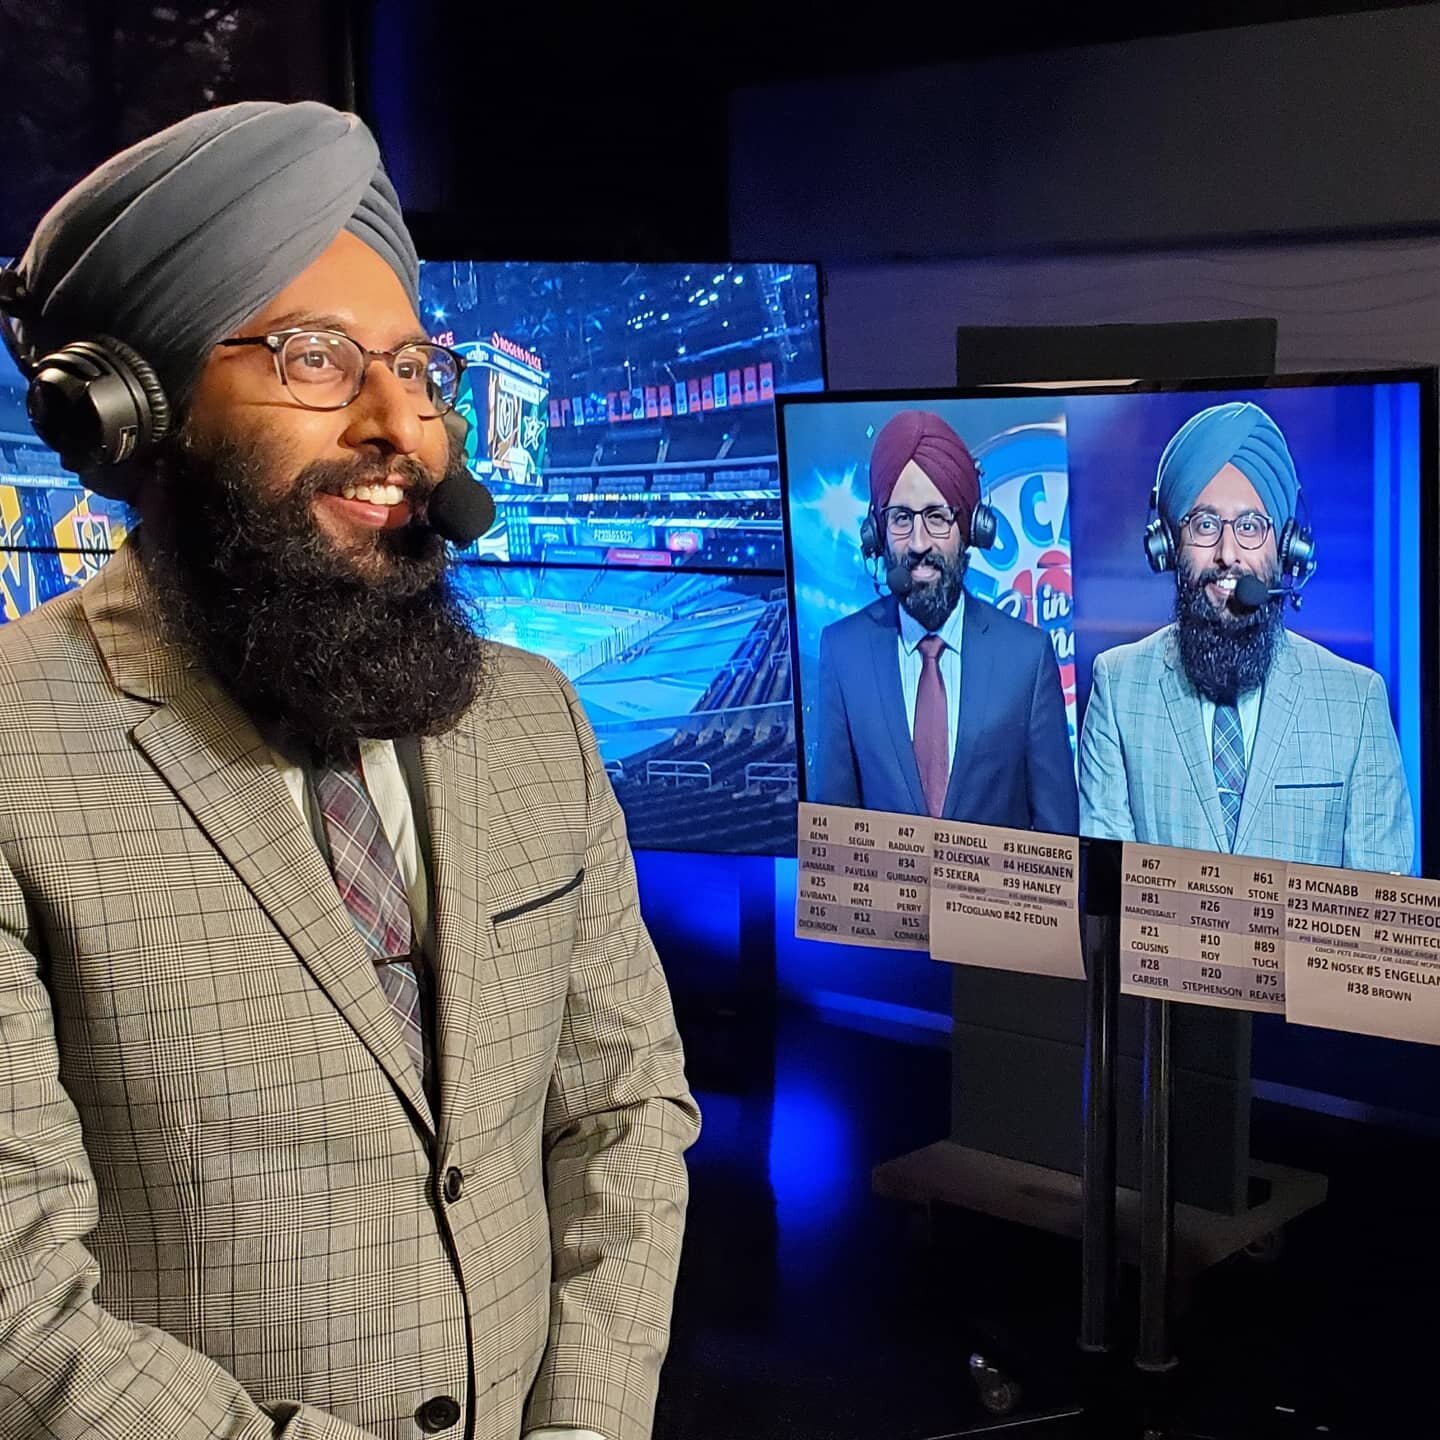 This weekend's look in the broadcast booth for @hockeynightpunjabi. Suit jacket requested by my 5 year old daughter!

#broadcaster #broadcasting #nhl #stanleycup #playbyplay #playoffs #turban #sikh #tv #television #hockeynight #hockeynightpunjabi